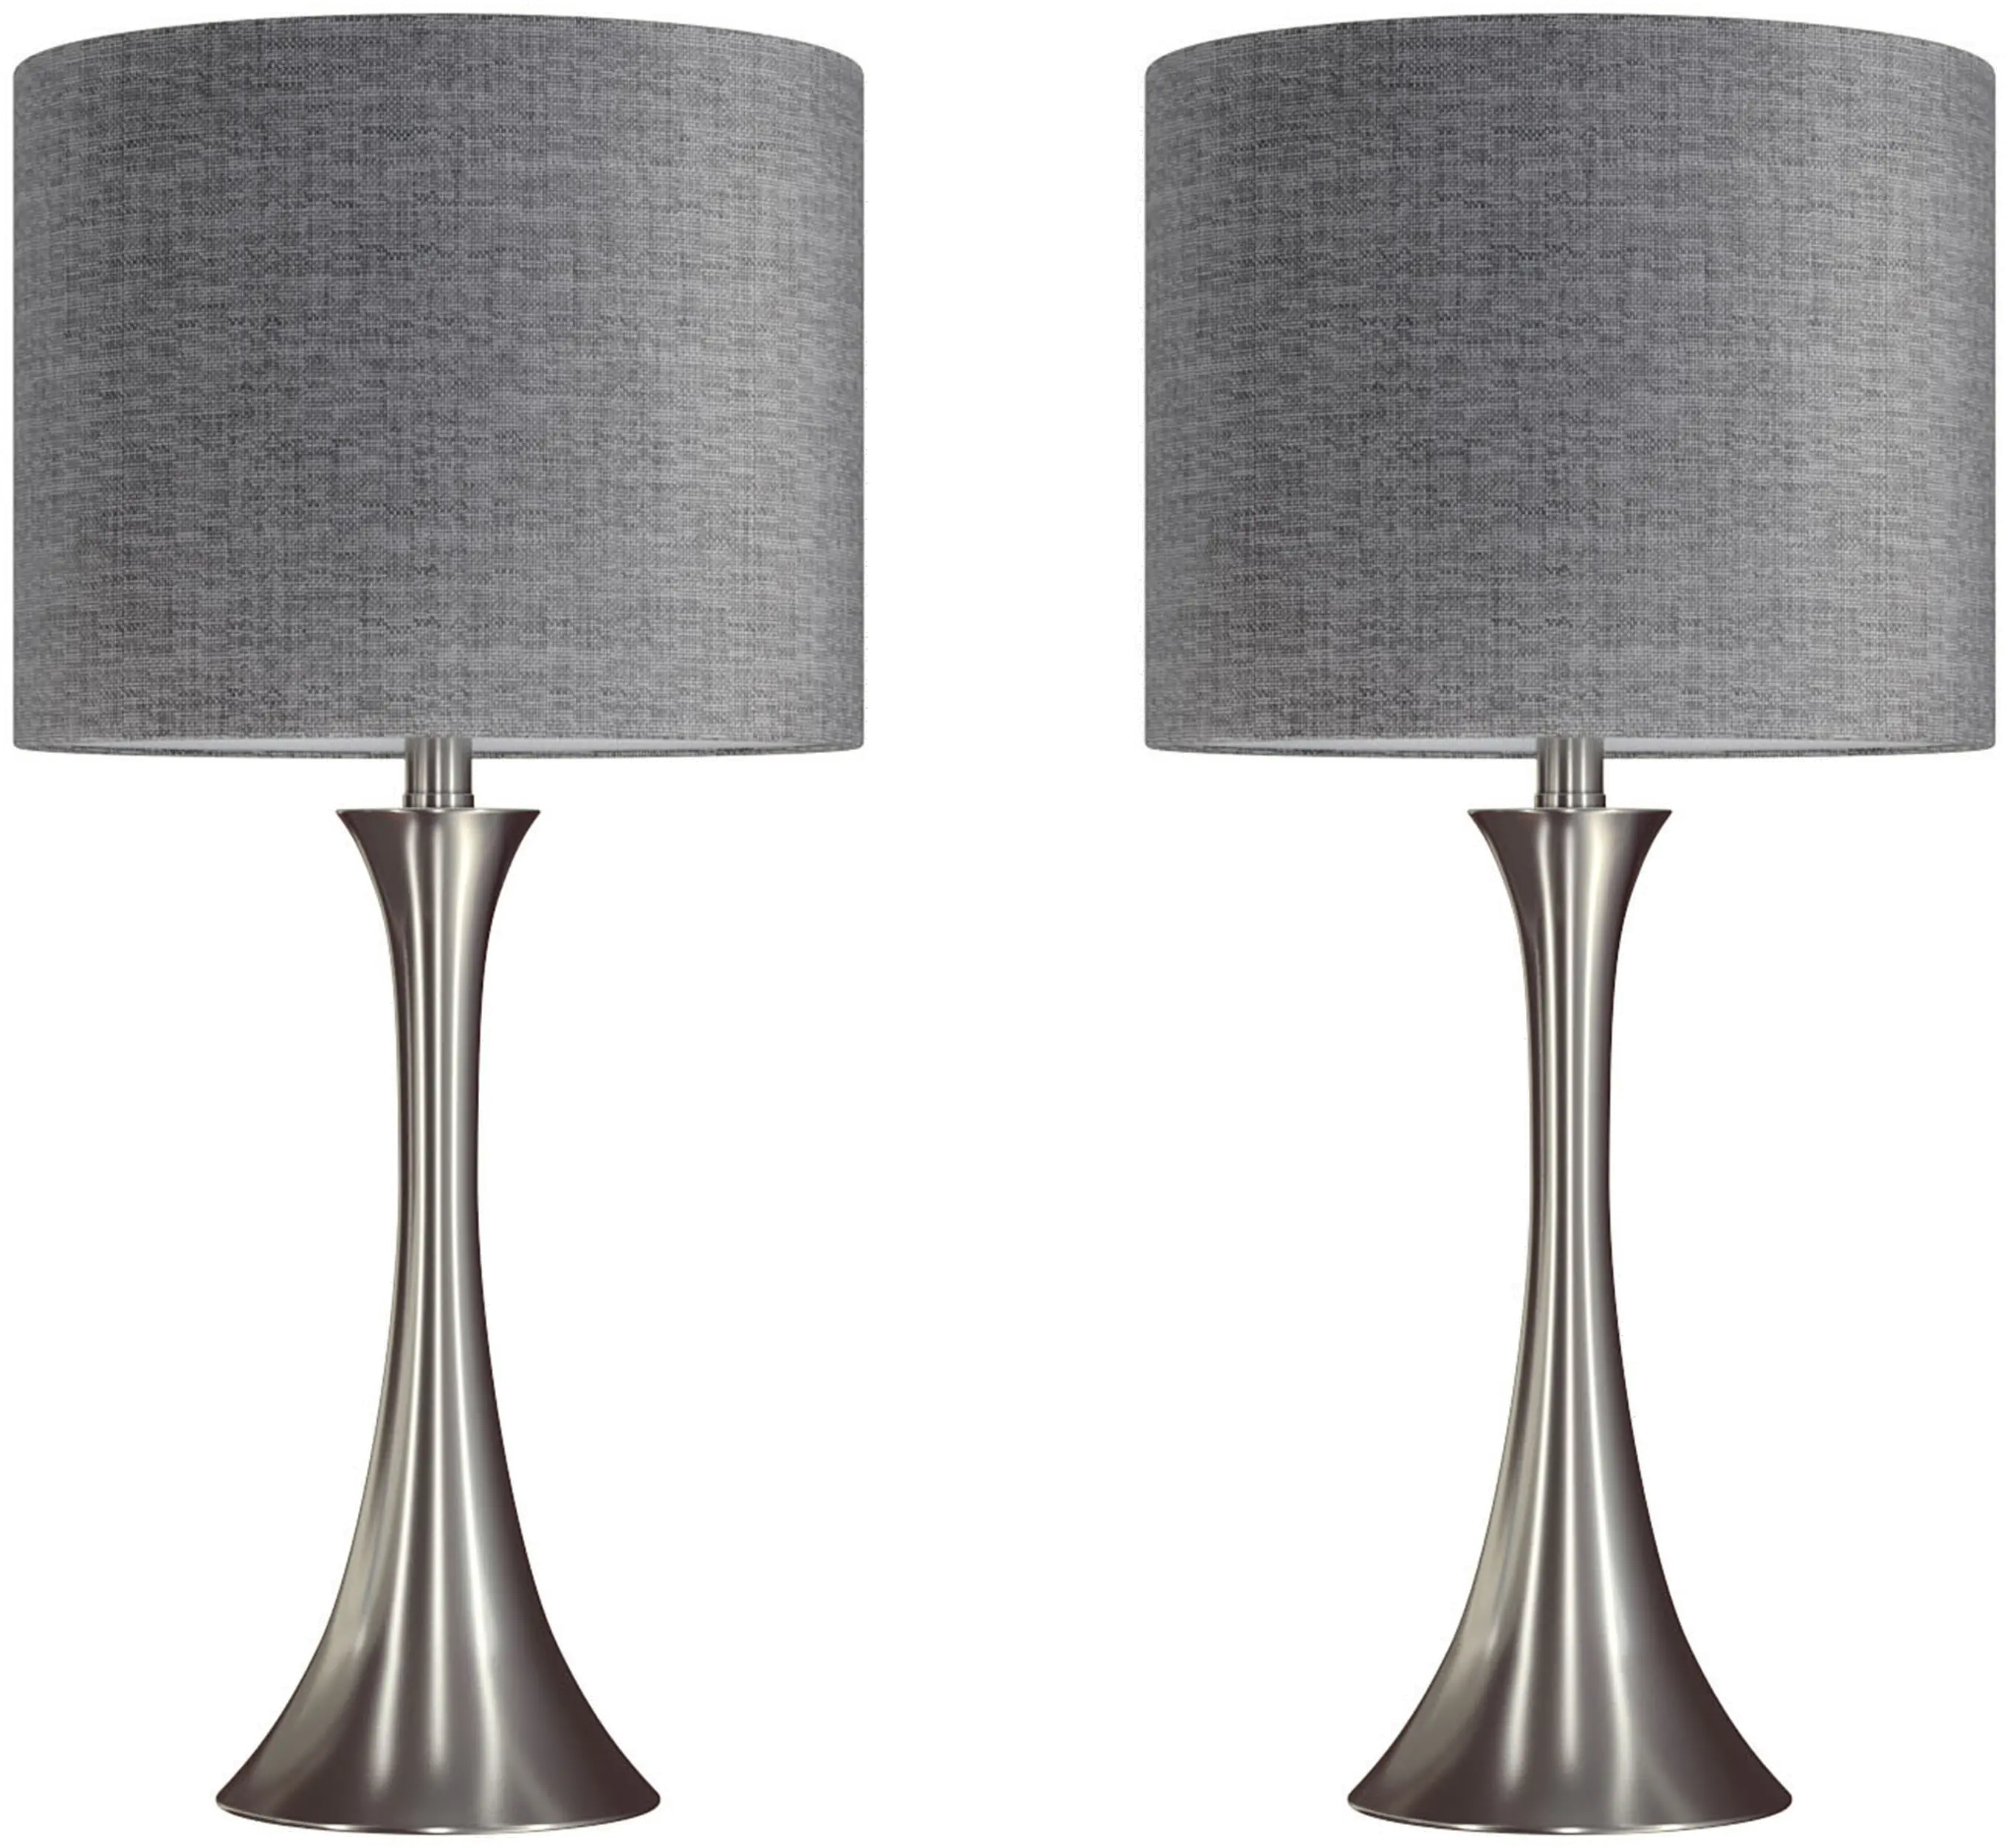 TL24-LENUXE-DBLNIGY2 Lenuxe Nickel Table Lamps with Gray Shades, Set of sku TL24-LENUXE-DBLNIGY2